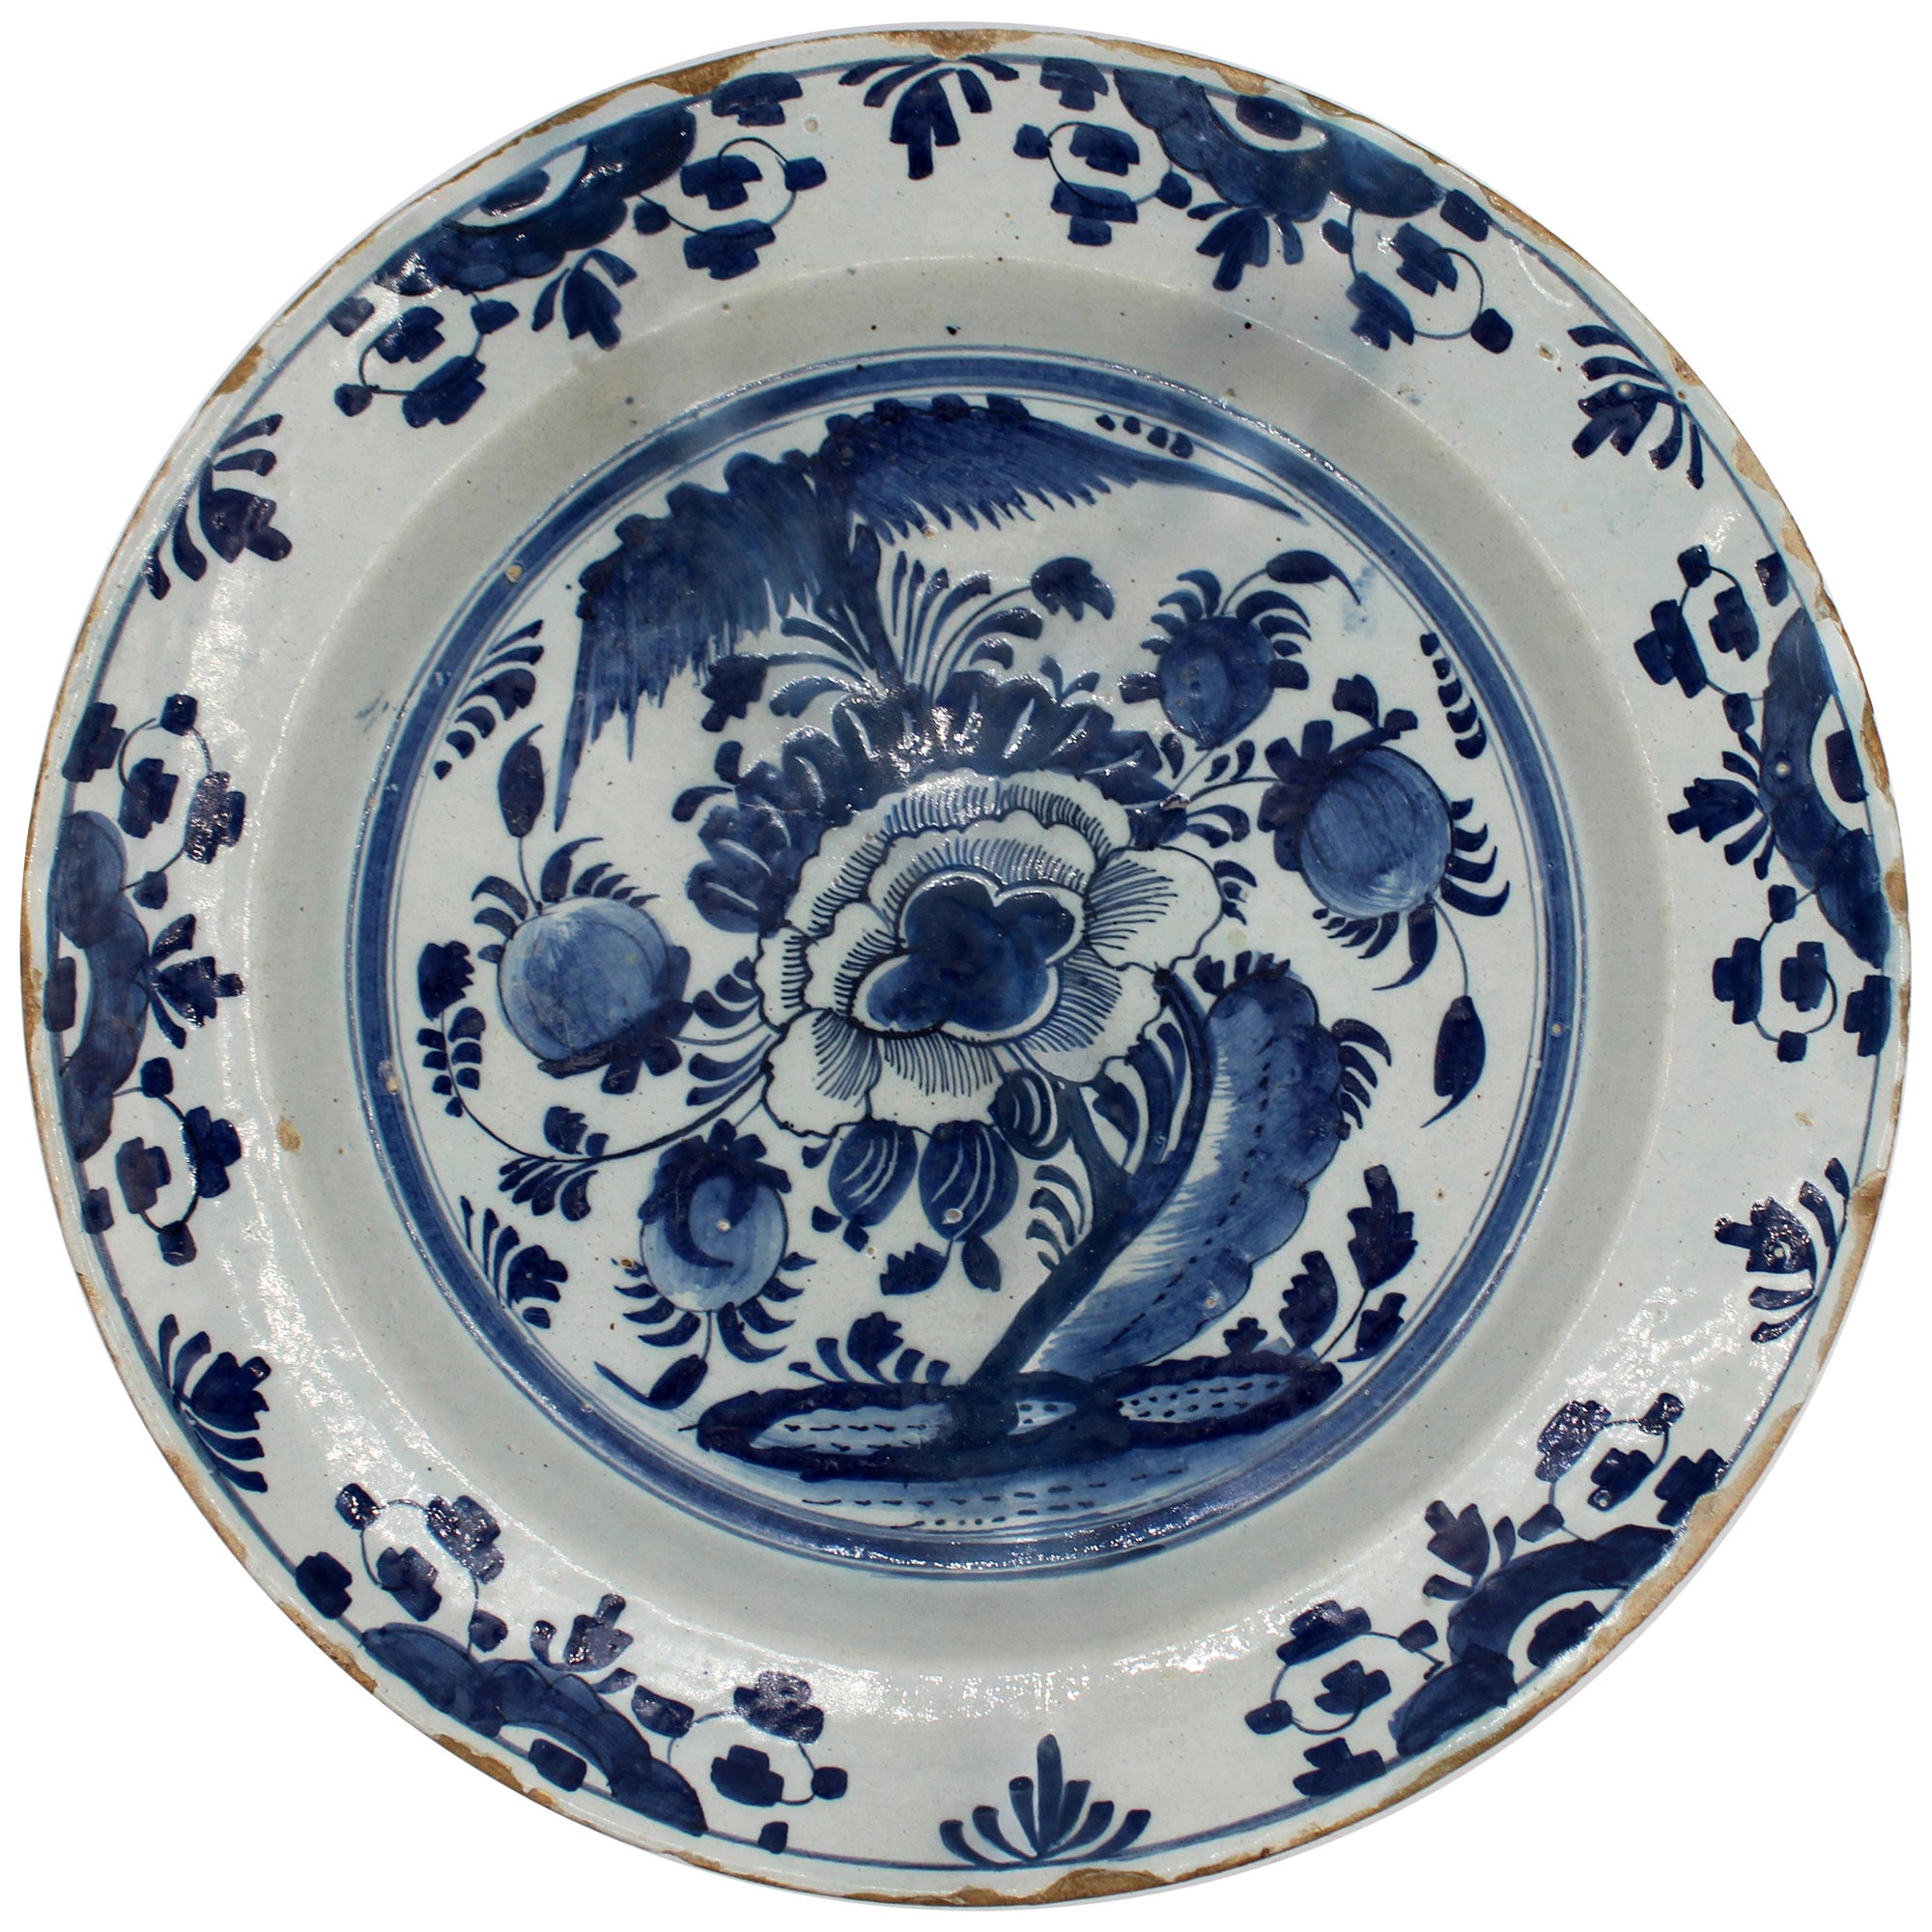 Late 18th Century Dutch Delft Charger